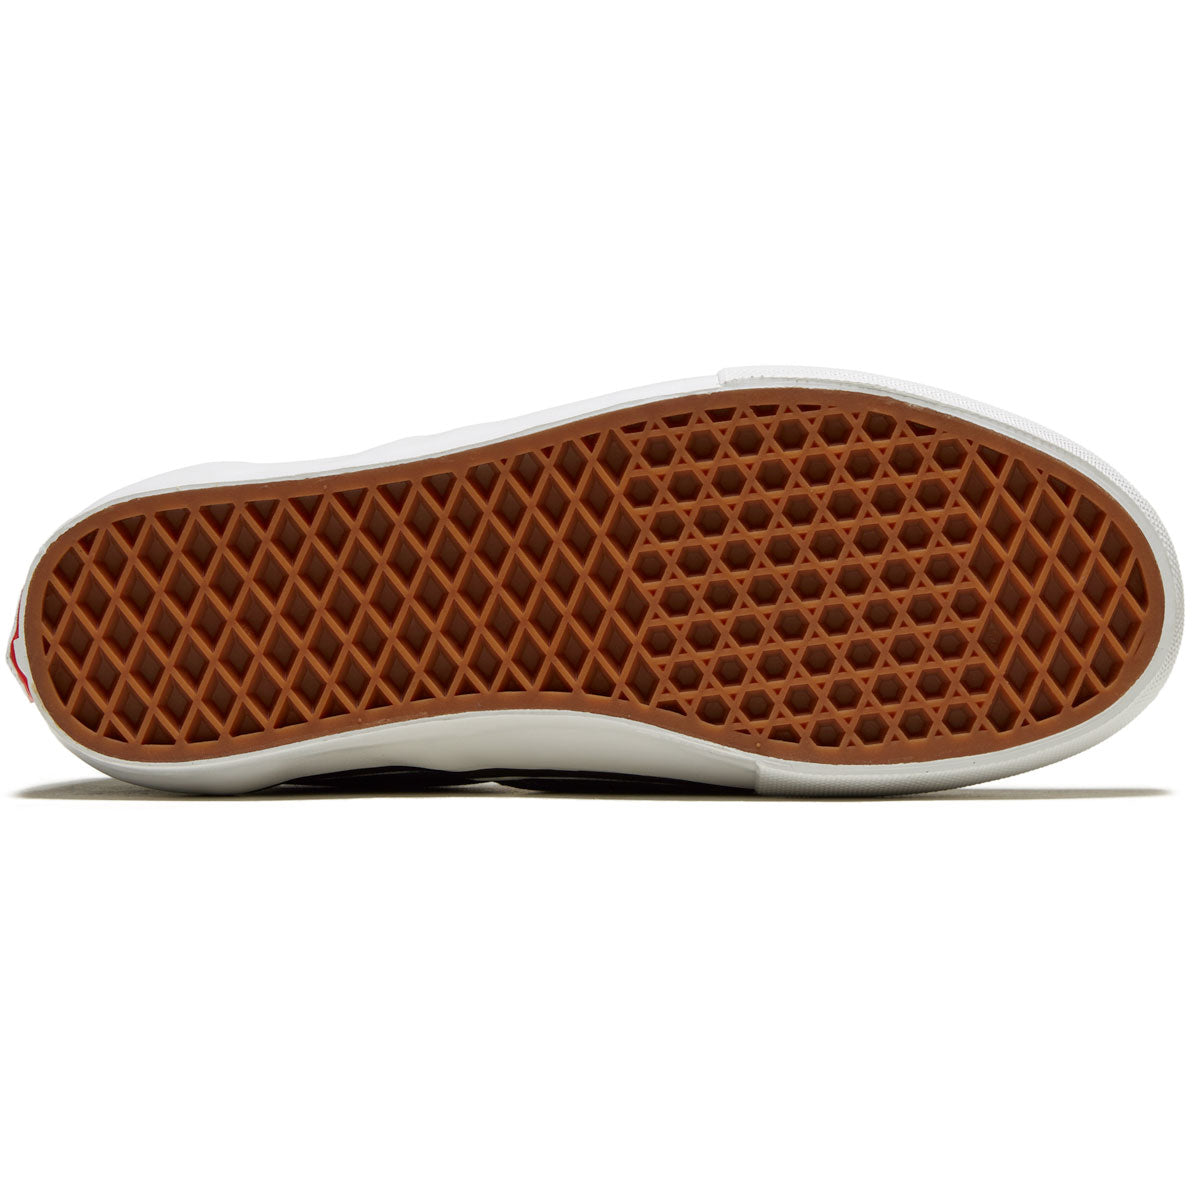 Vans Skate Slip-on Shoes - Mountain View image 4